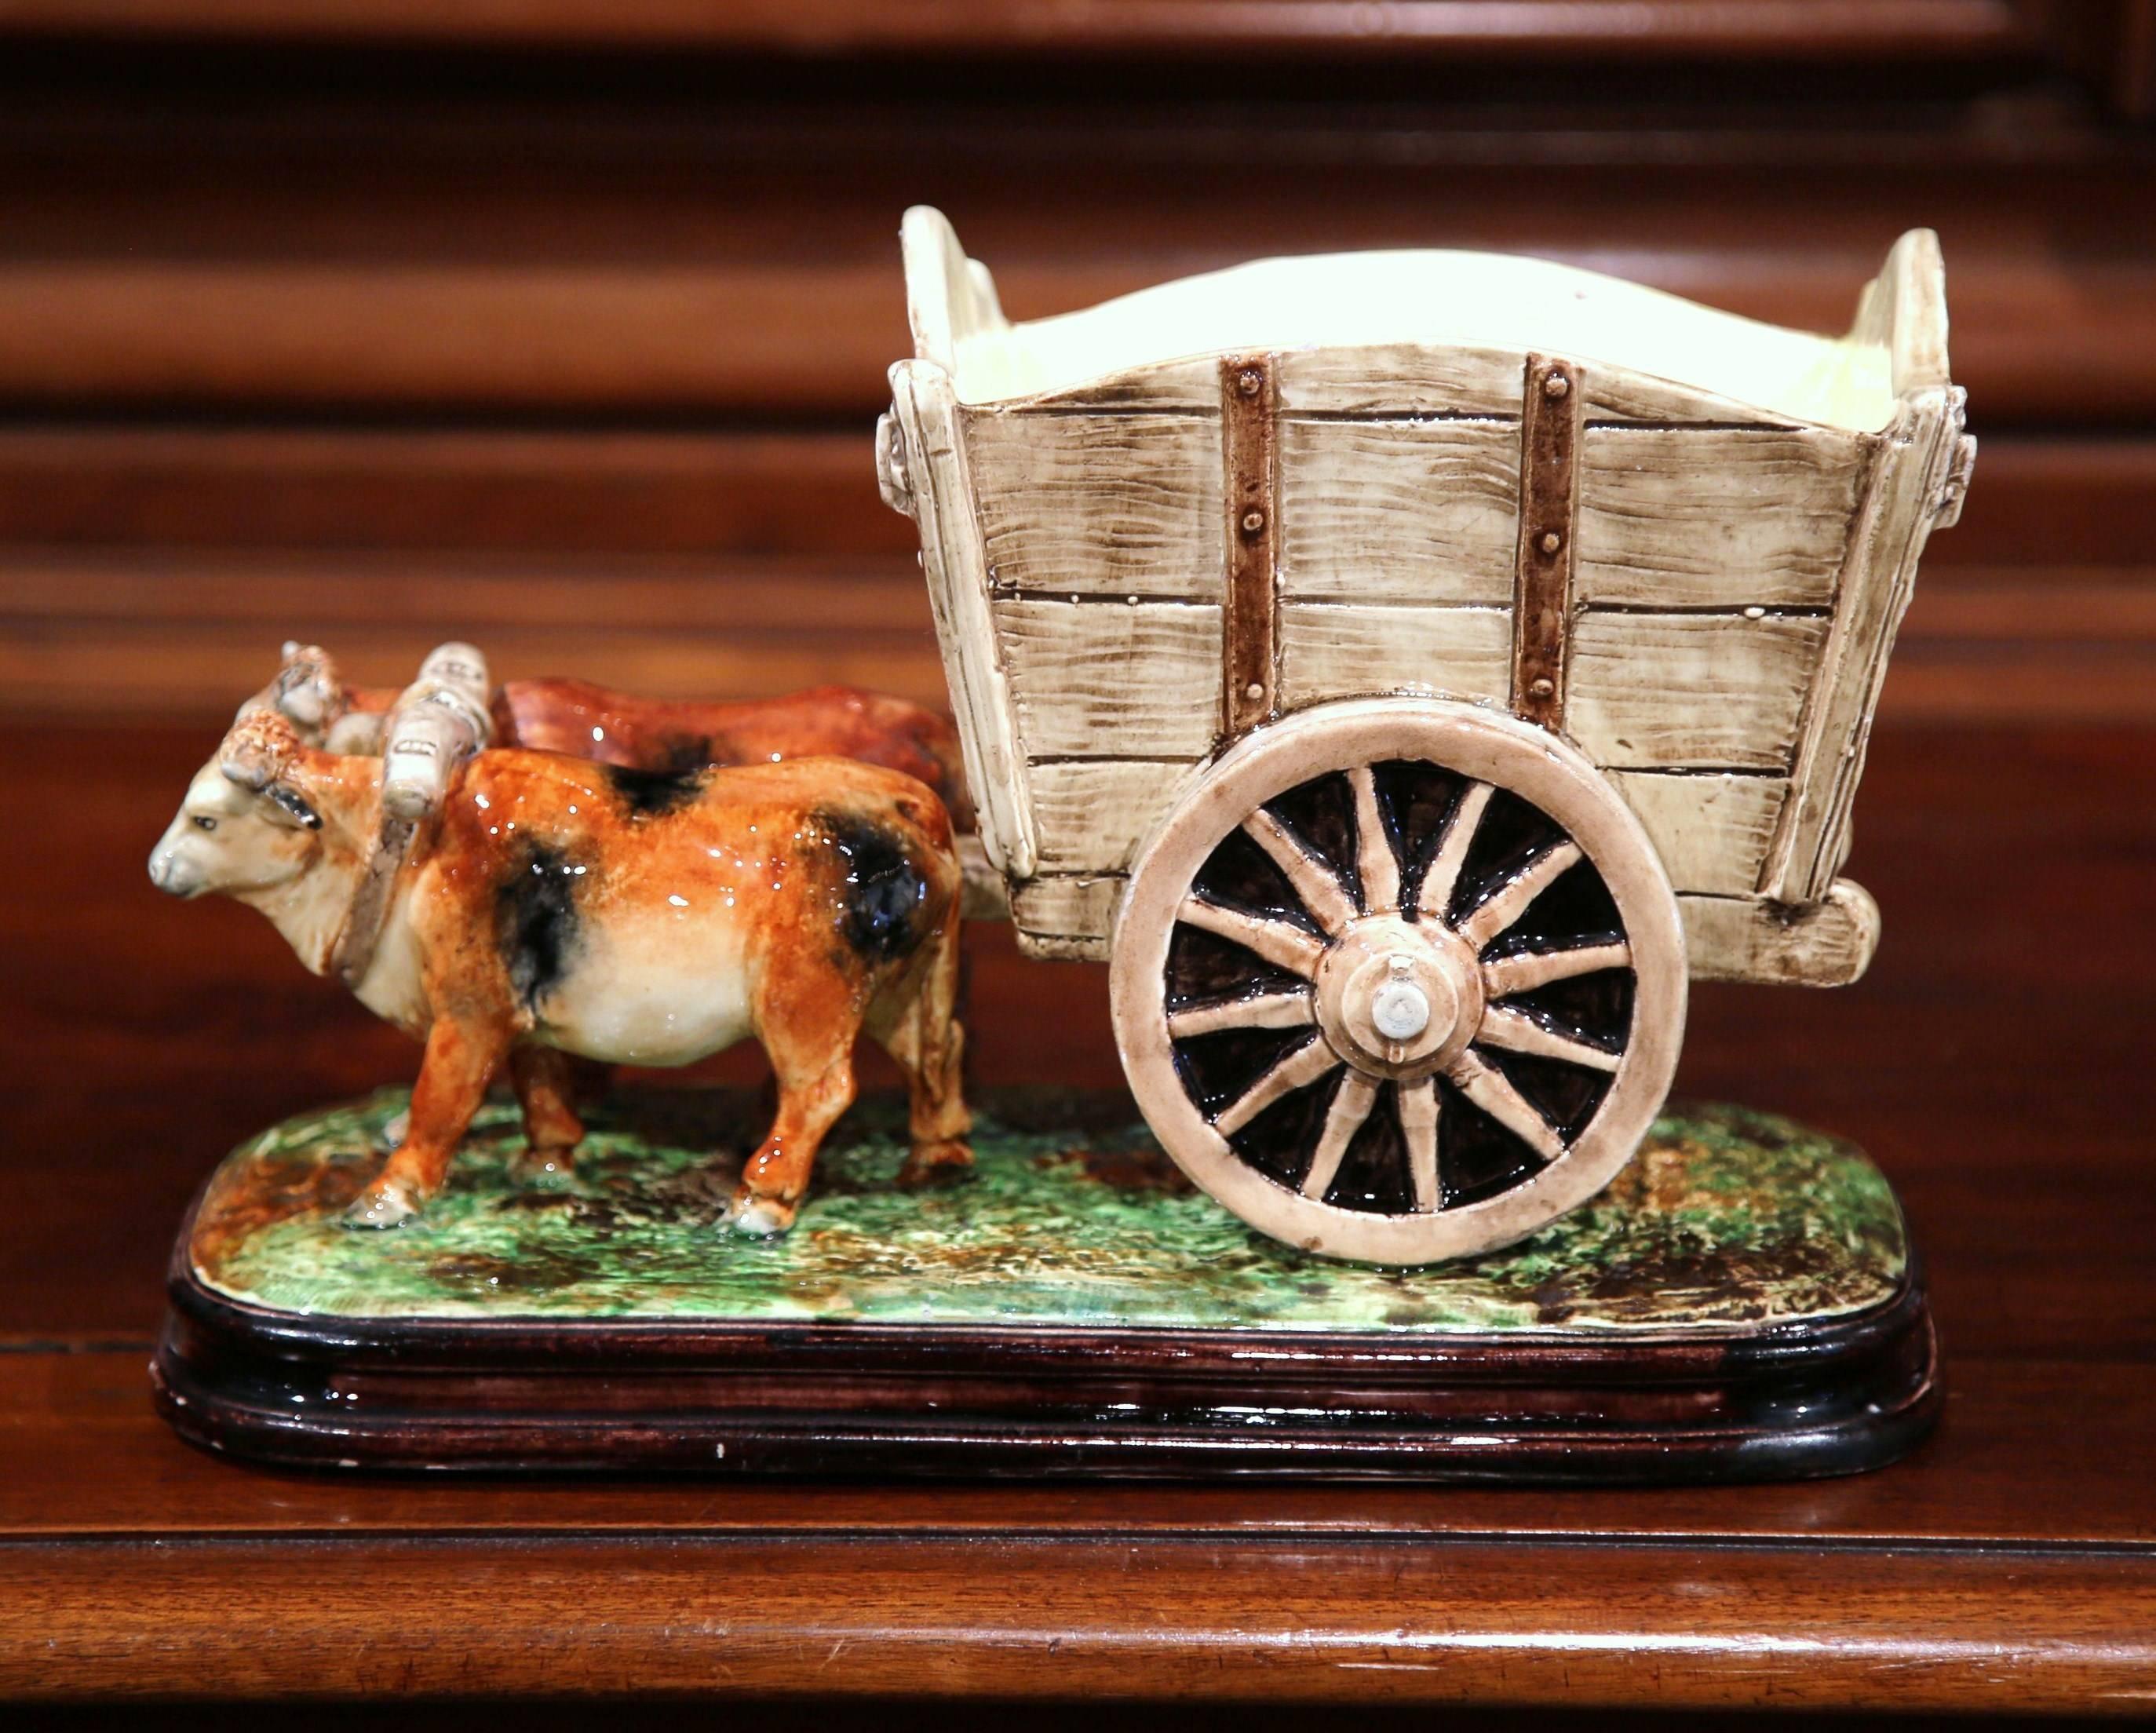 This colorful, antique Majolica sculpture composition depicts a Classic farm scene with cows pulling a cart. Created in France circa 1870, the ceramic jardinière features a pair of bovines joined together by a yoke, pulling a large wagon on wheel.